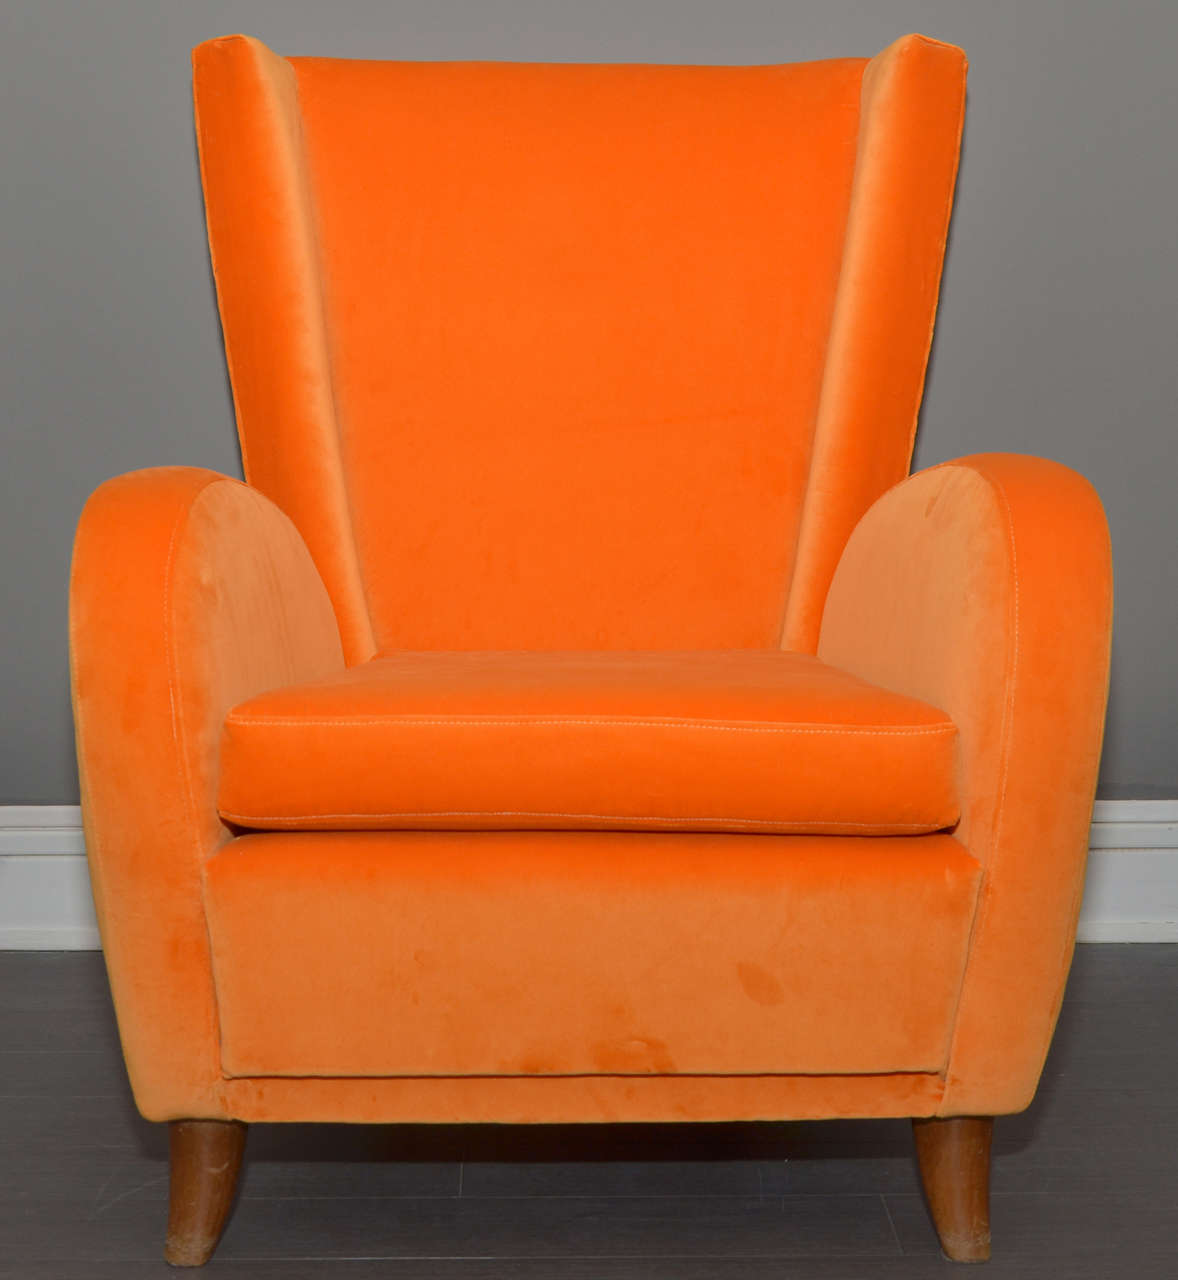 Two 1950s Italian armchairs, reupholstered in orange velvet, with wooden legs.